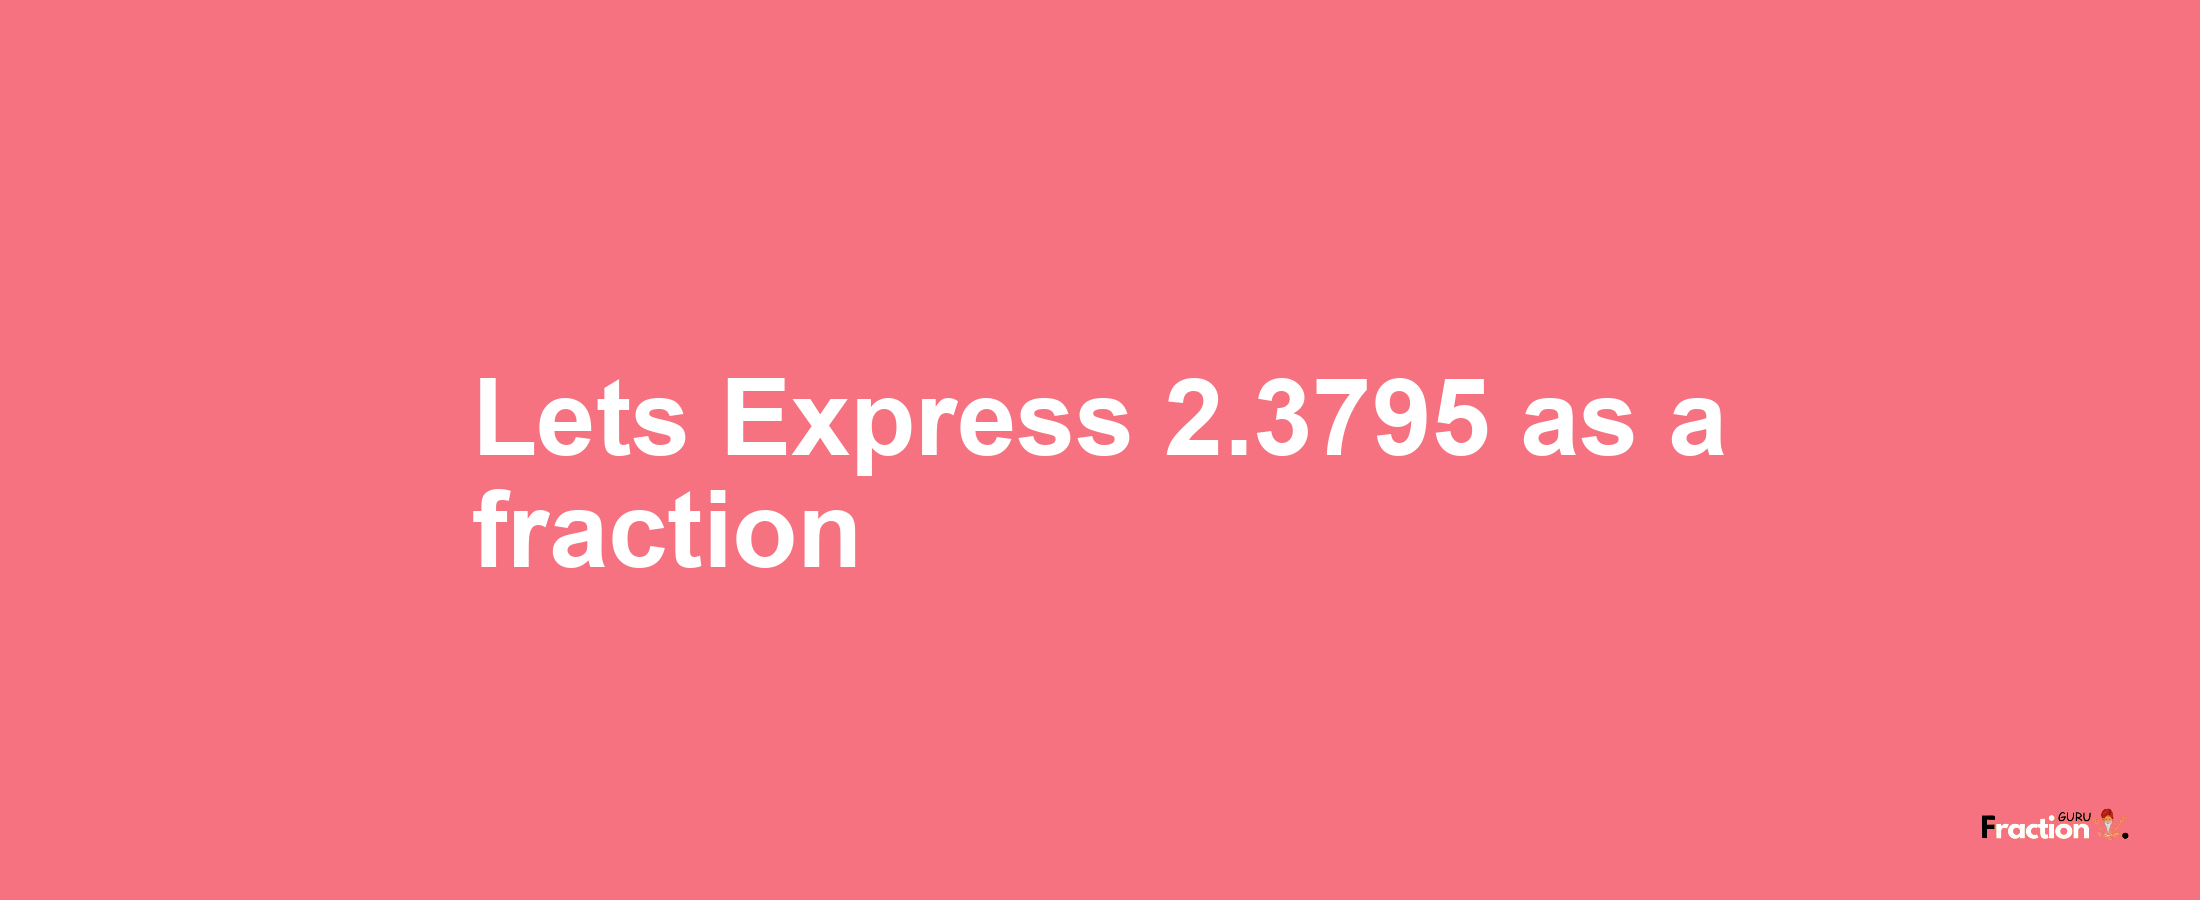 Lets Express 2.3795 as afraction